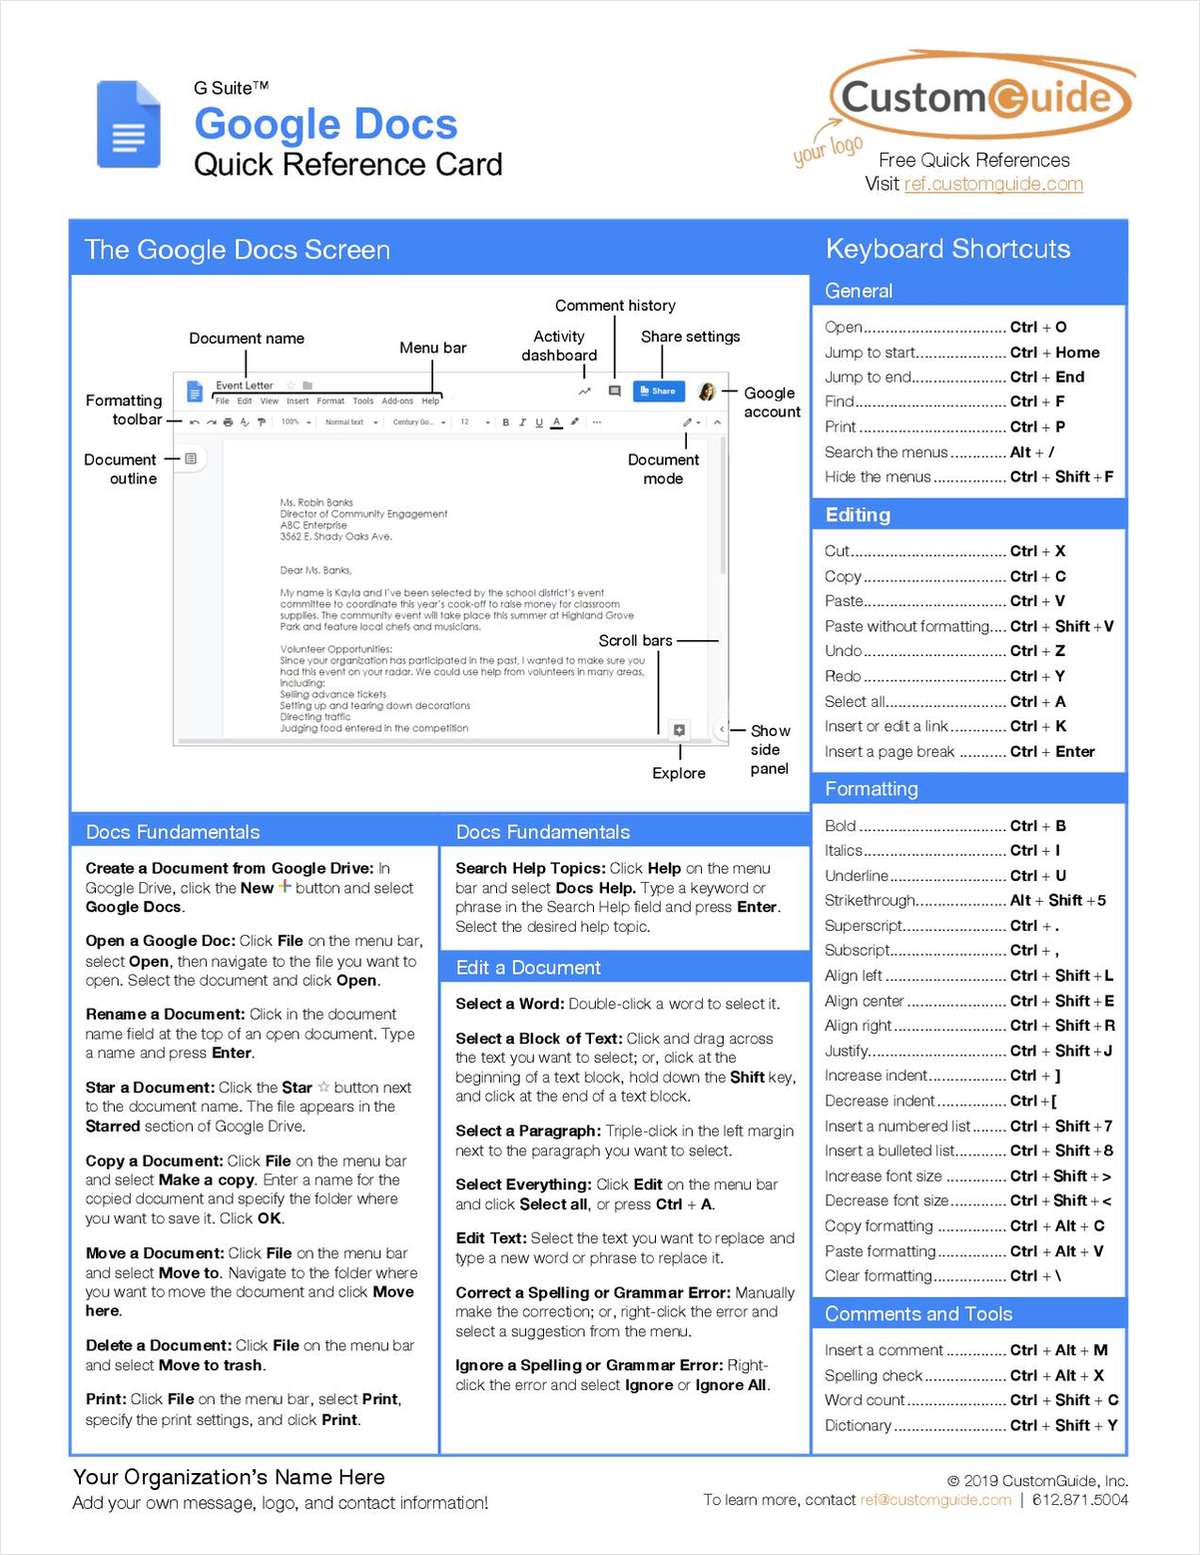 Google Docs - Quick Reference Guide